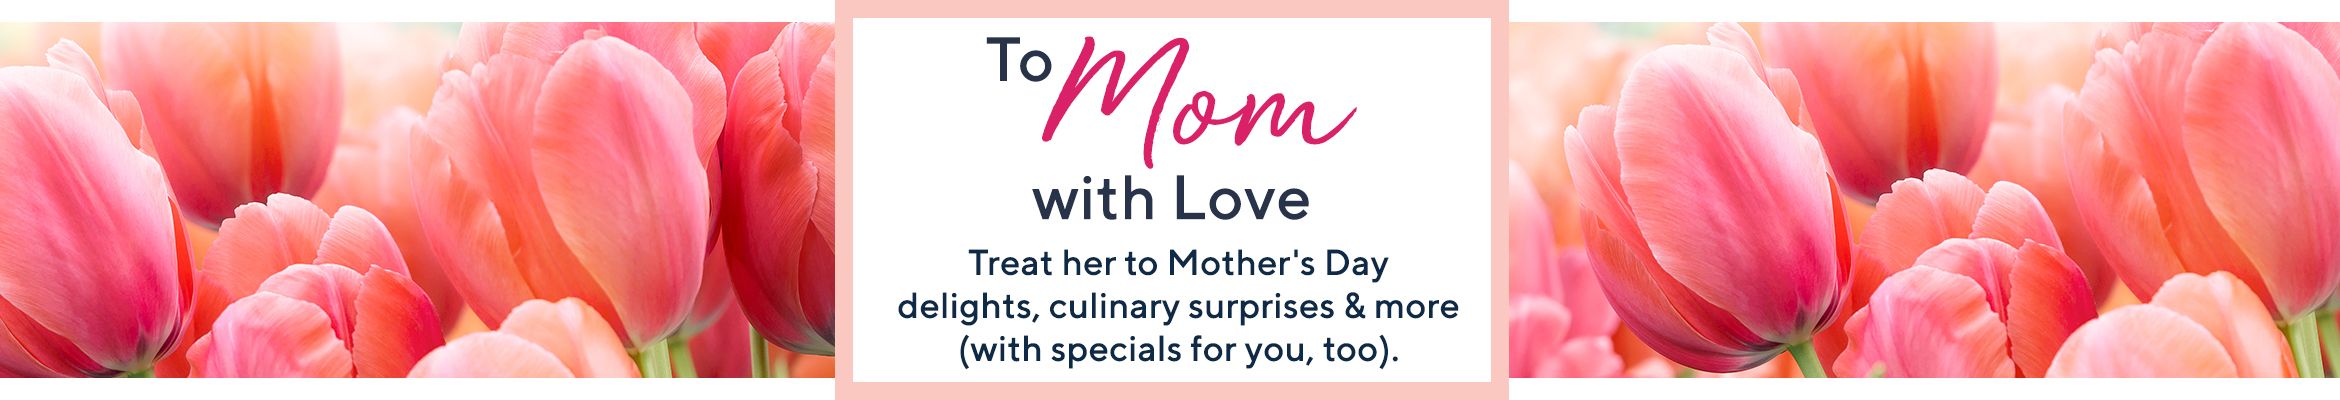 To Mom with Love. Treat her to Mother's Day delights, culinary surprises & more (with specials for you, too).